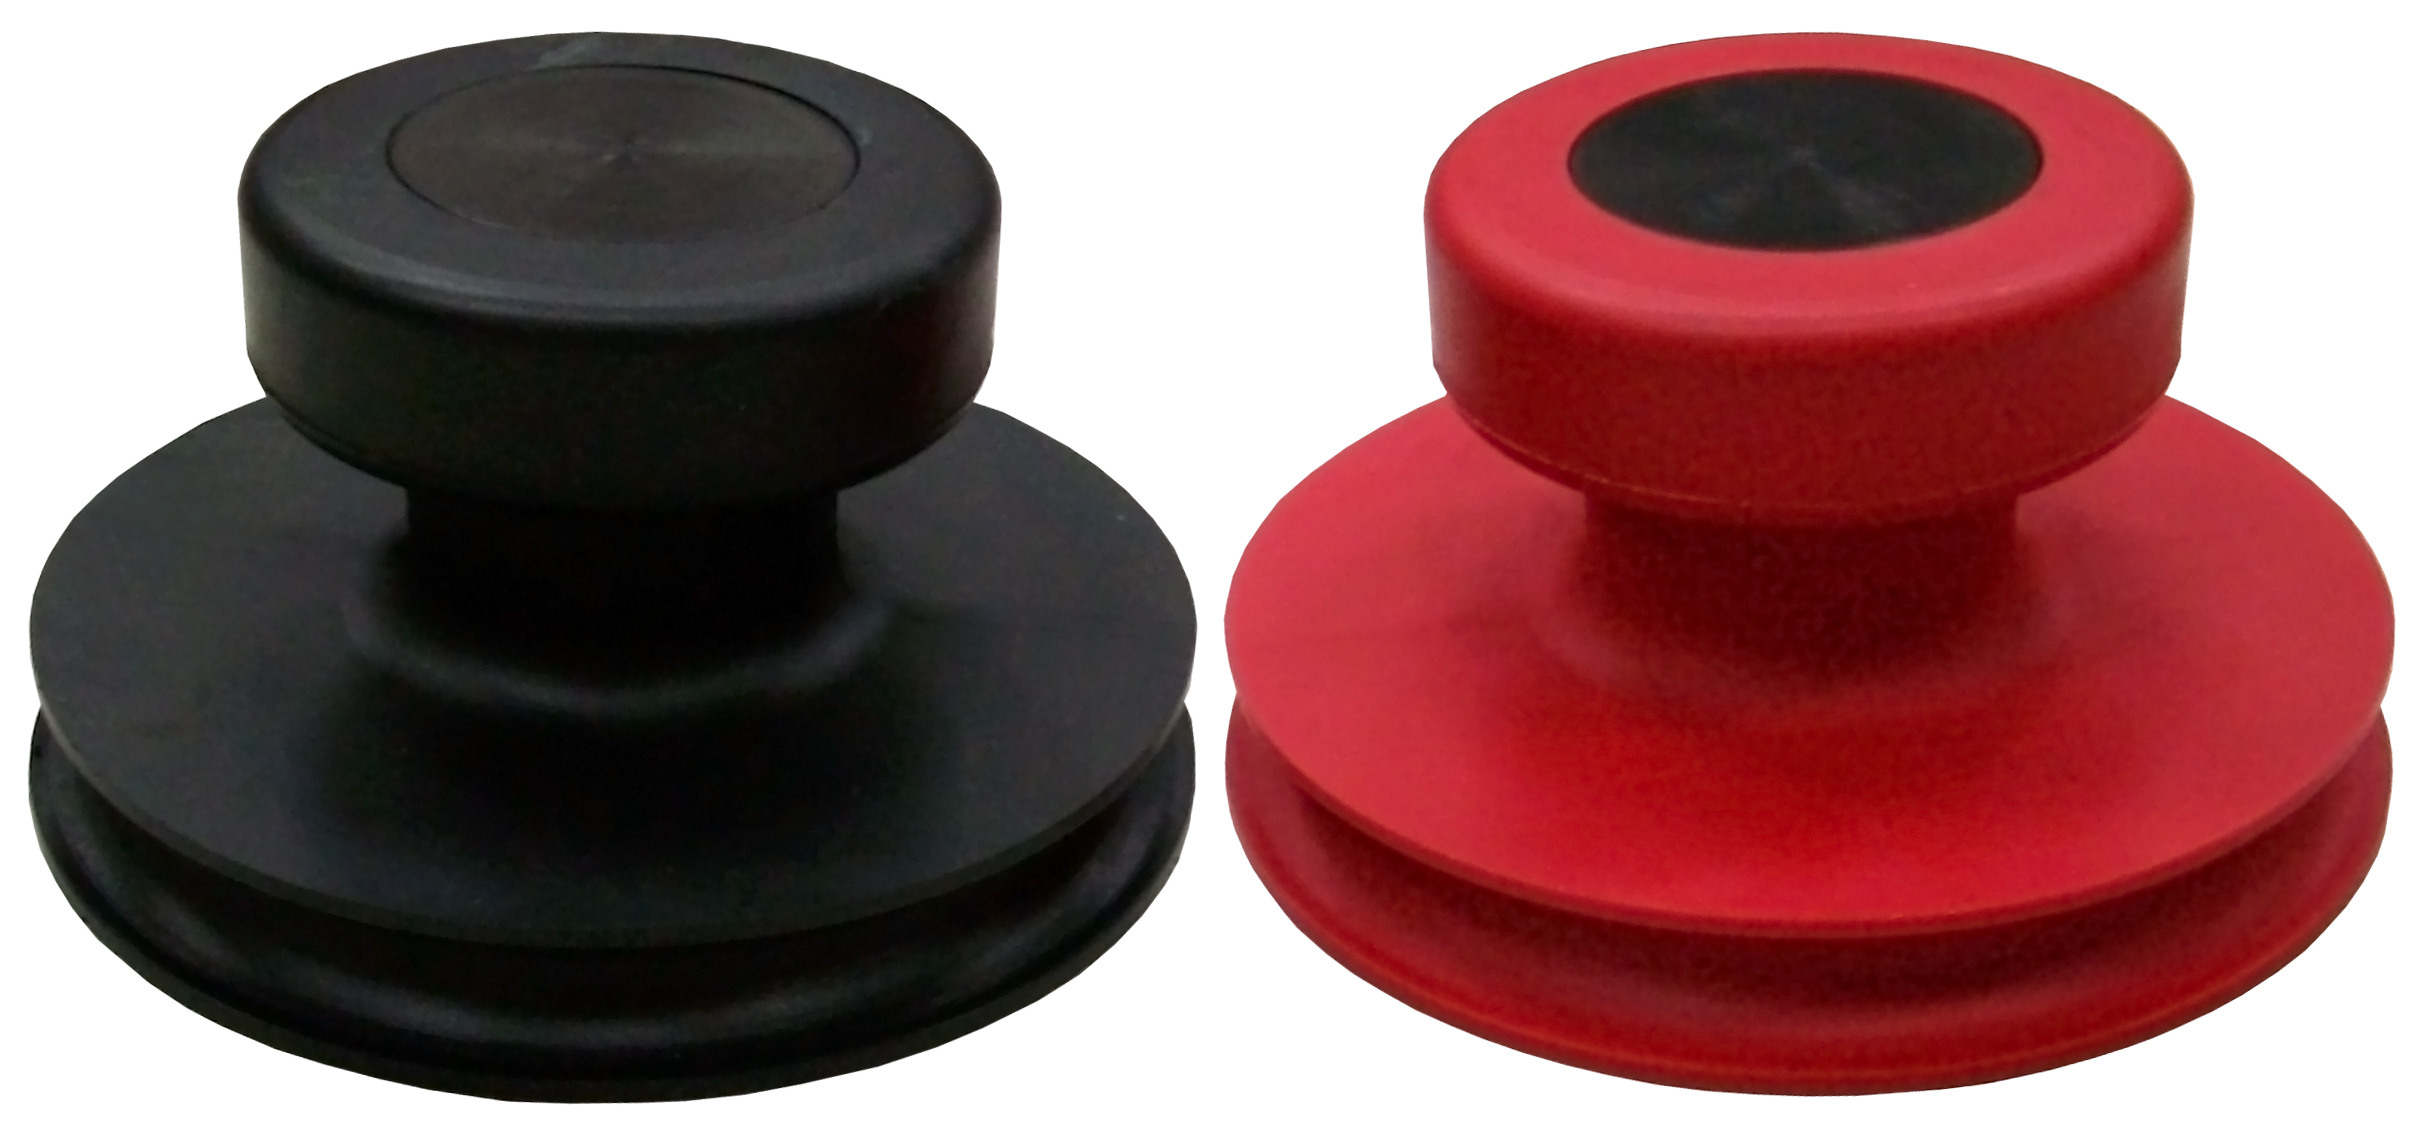 MULTI-FUNCTION SUCTION CUP